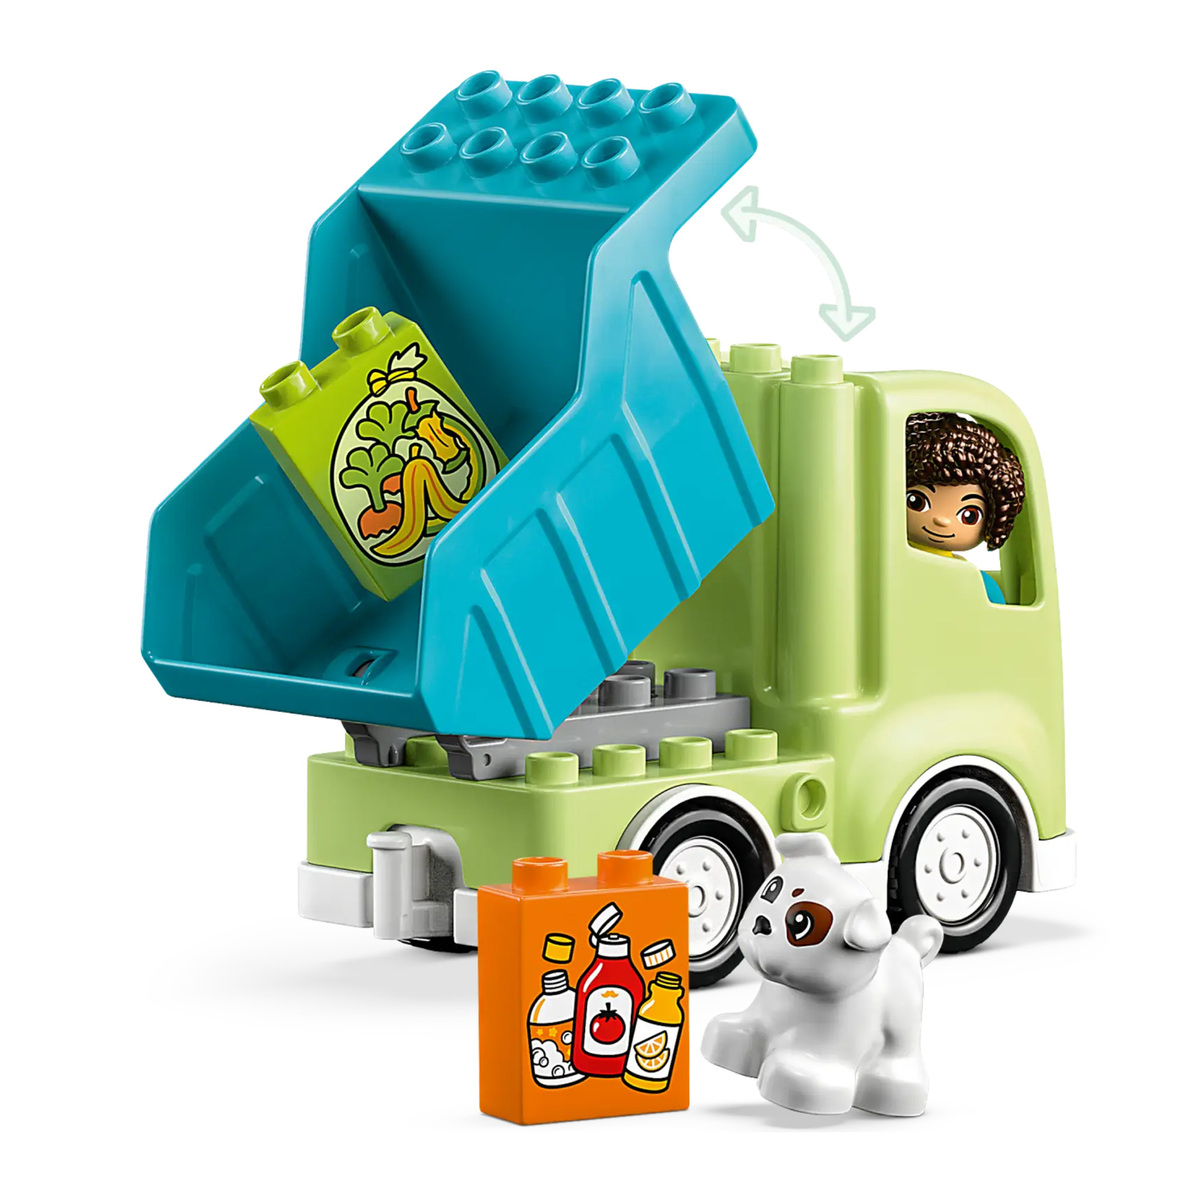 Lego Duplo Recycling Truck, 10987